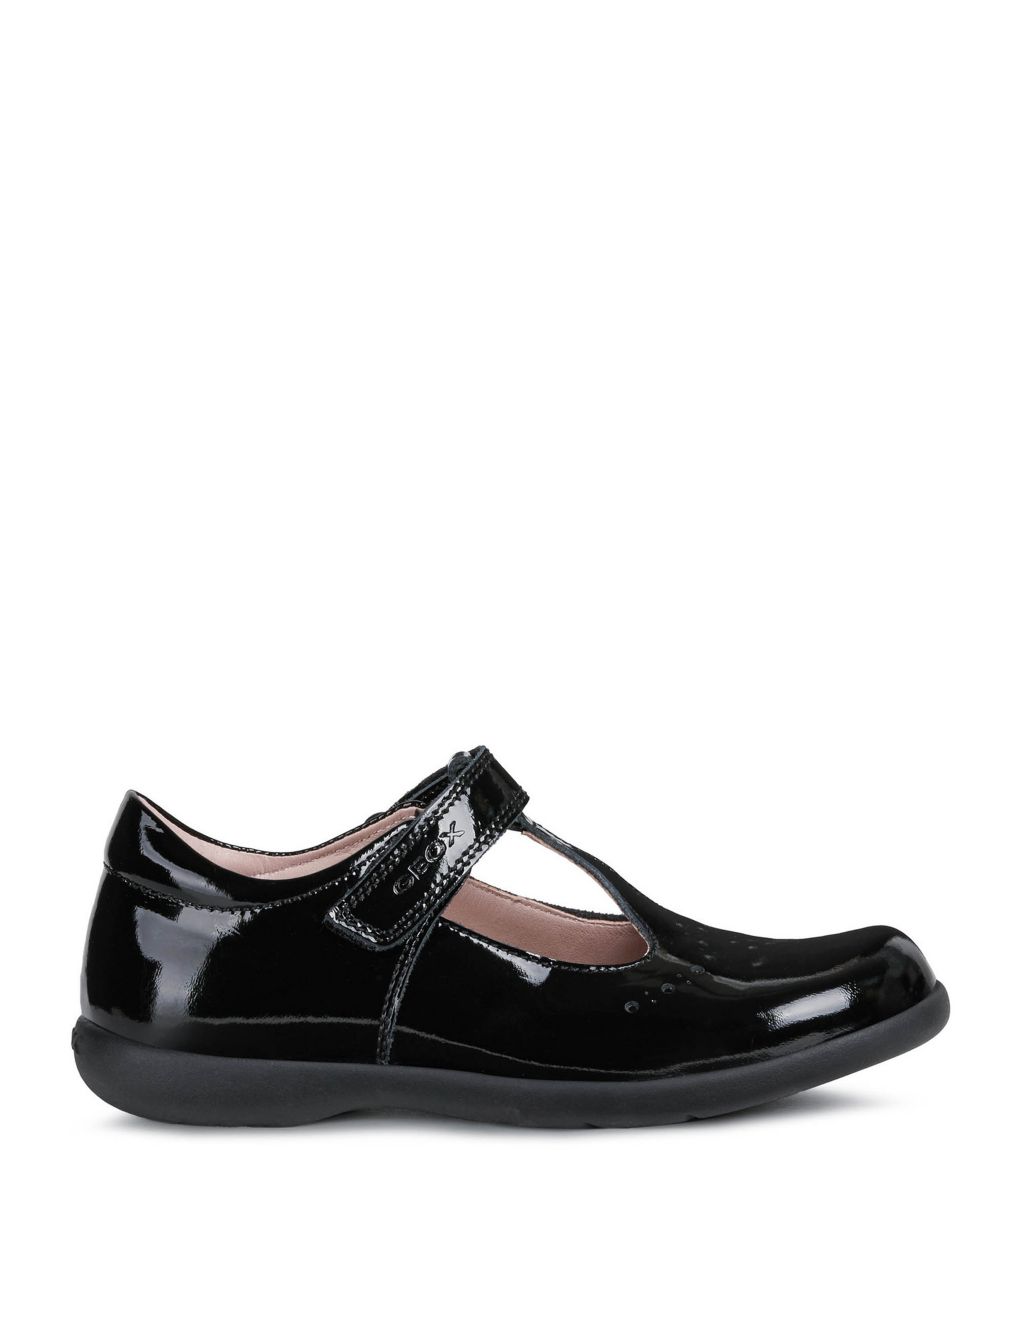 Kids' Patent Leather School Shoes (8½ Small-12½ Small)